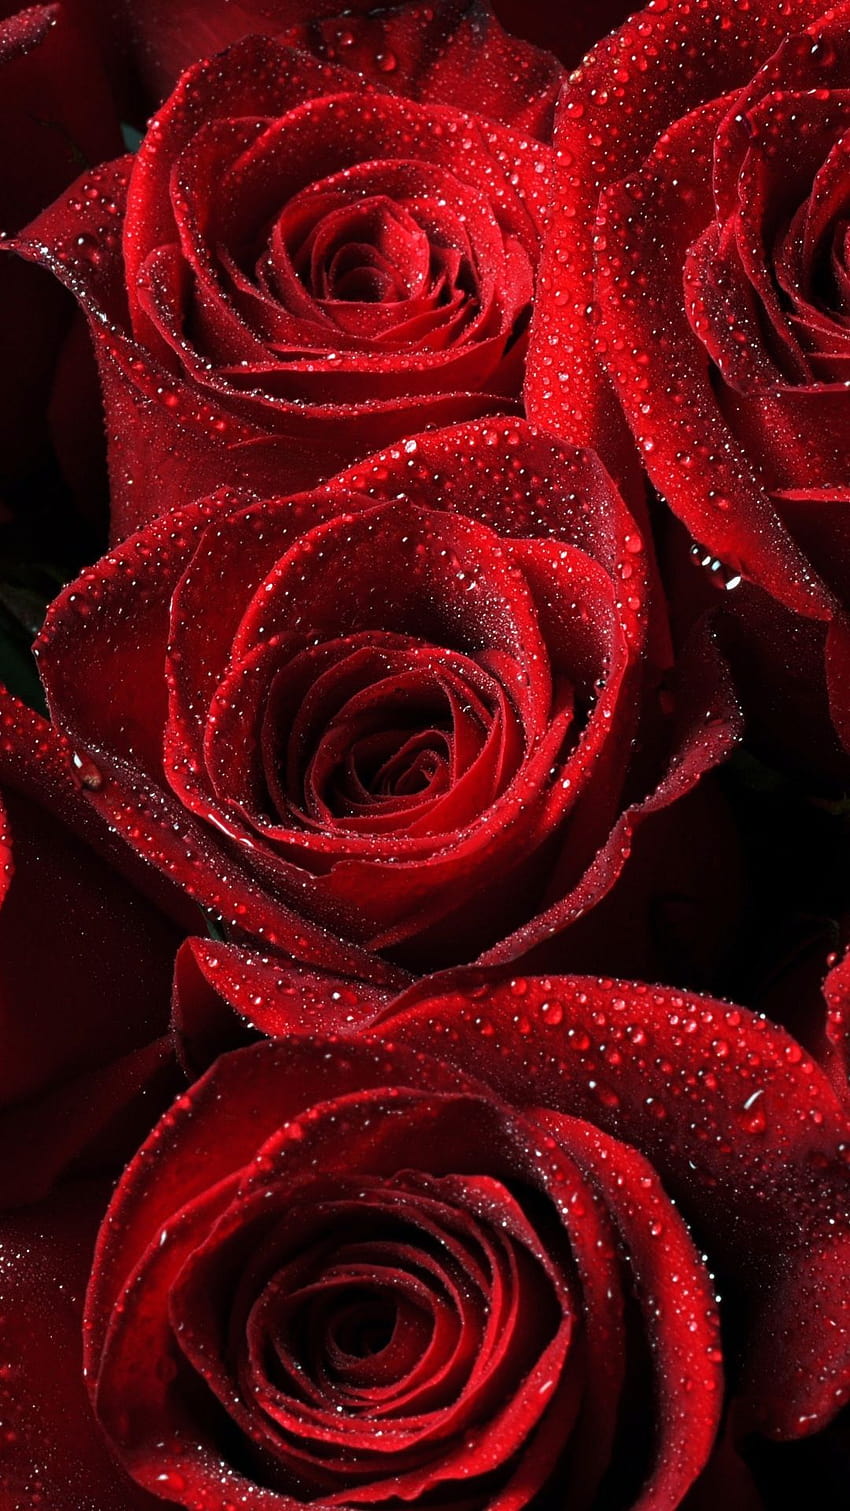 Nature Beautiful Roses Red Passion Cool Blooming Flowers, le rose sono rosse Sfondo del telefono HD